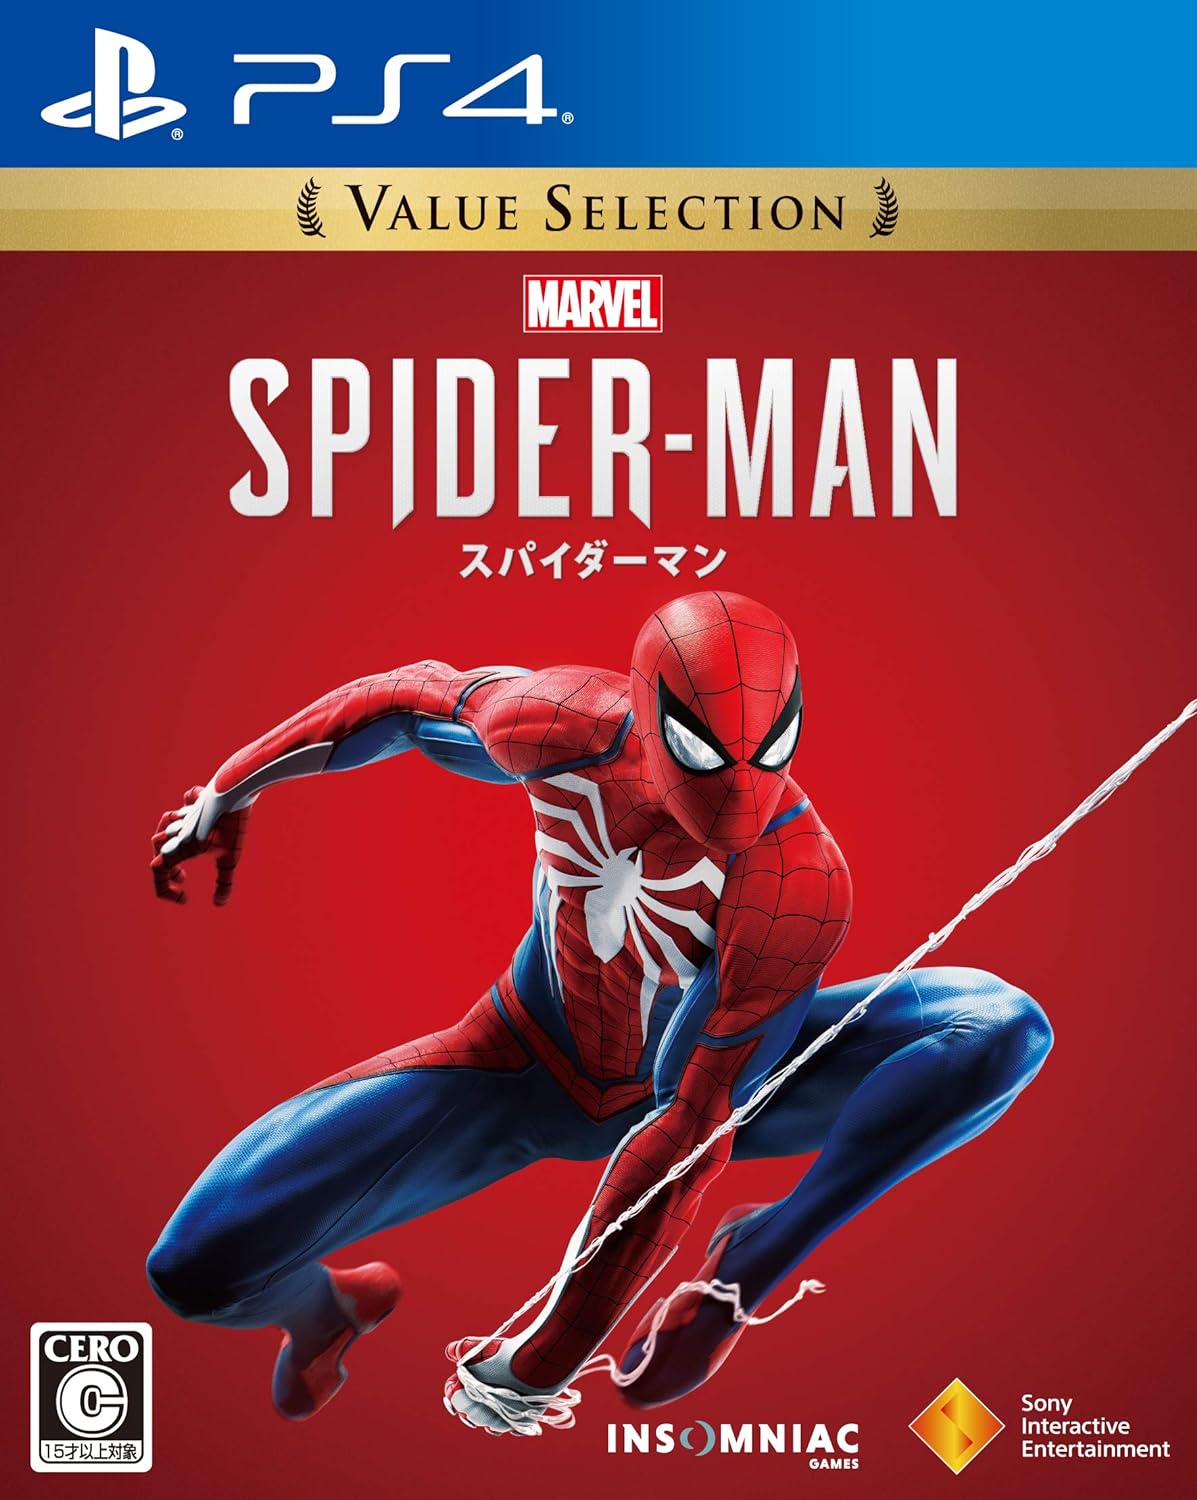 yPS4zMarvel's Spider-Man Value Selection